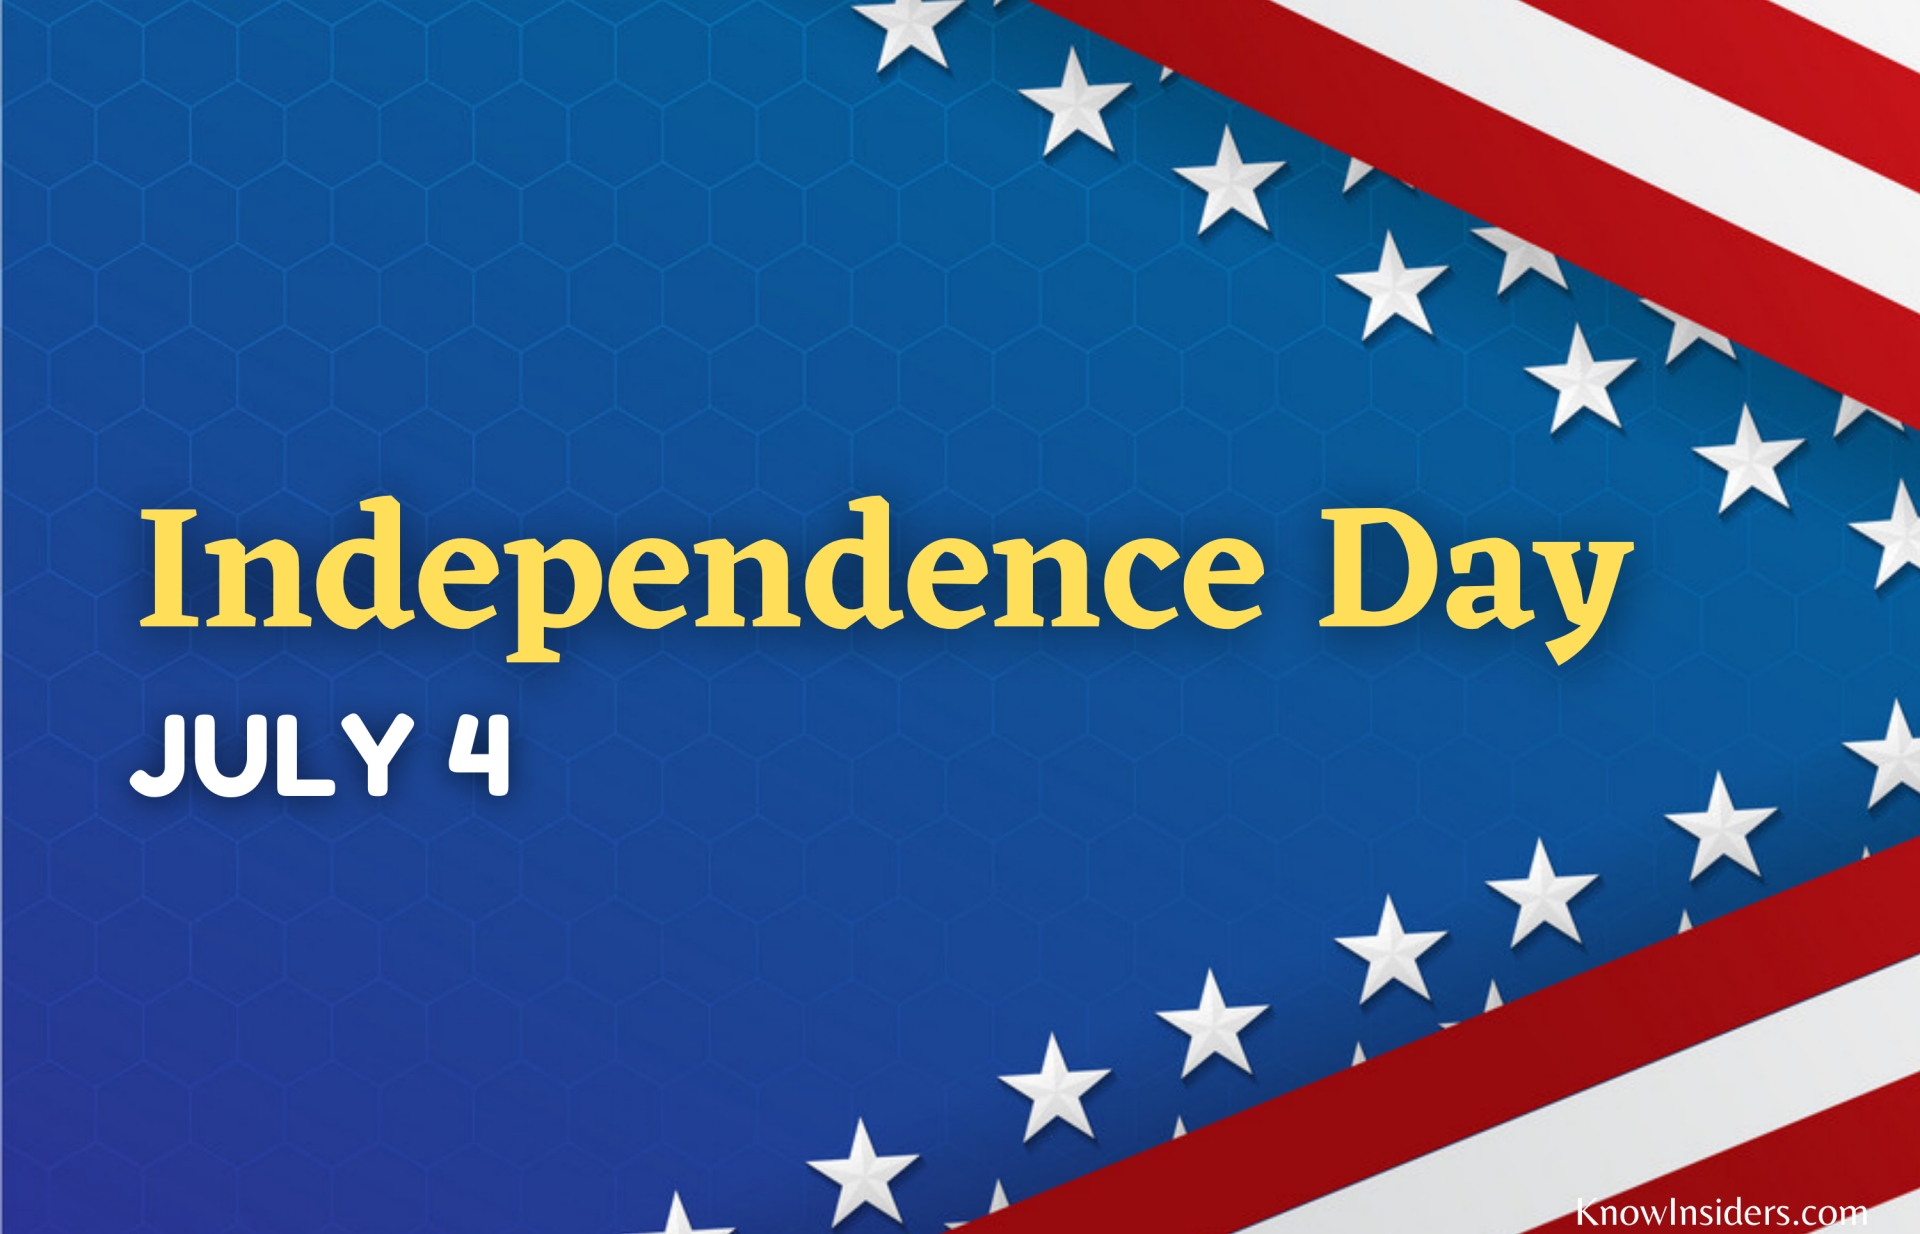 USA Independence Day (July 4): Timeline, Q & A and Facts